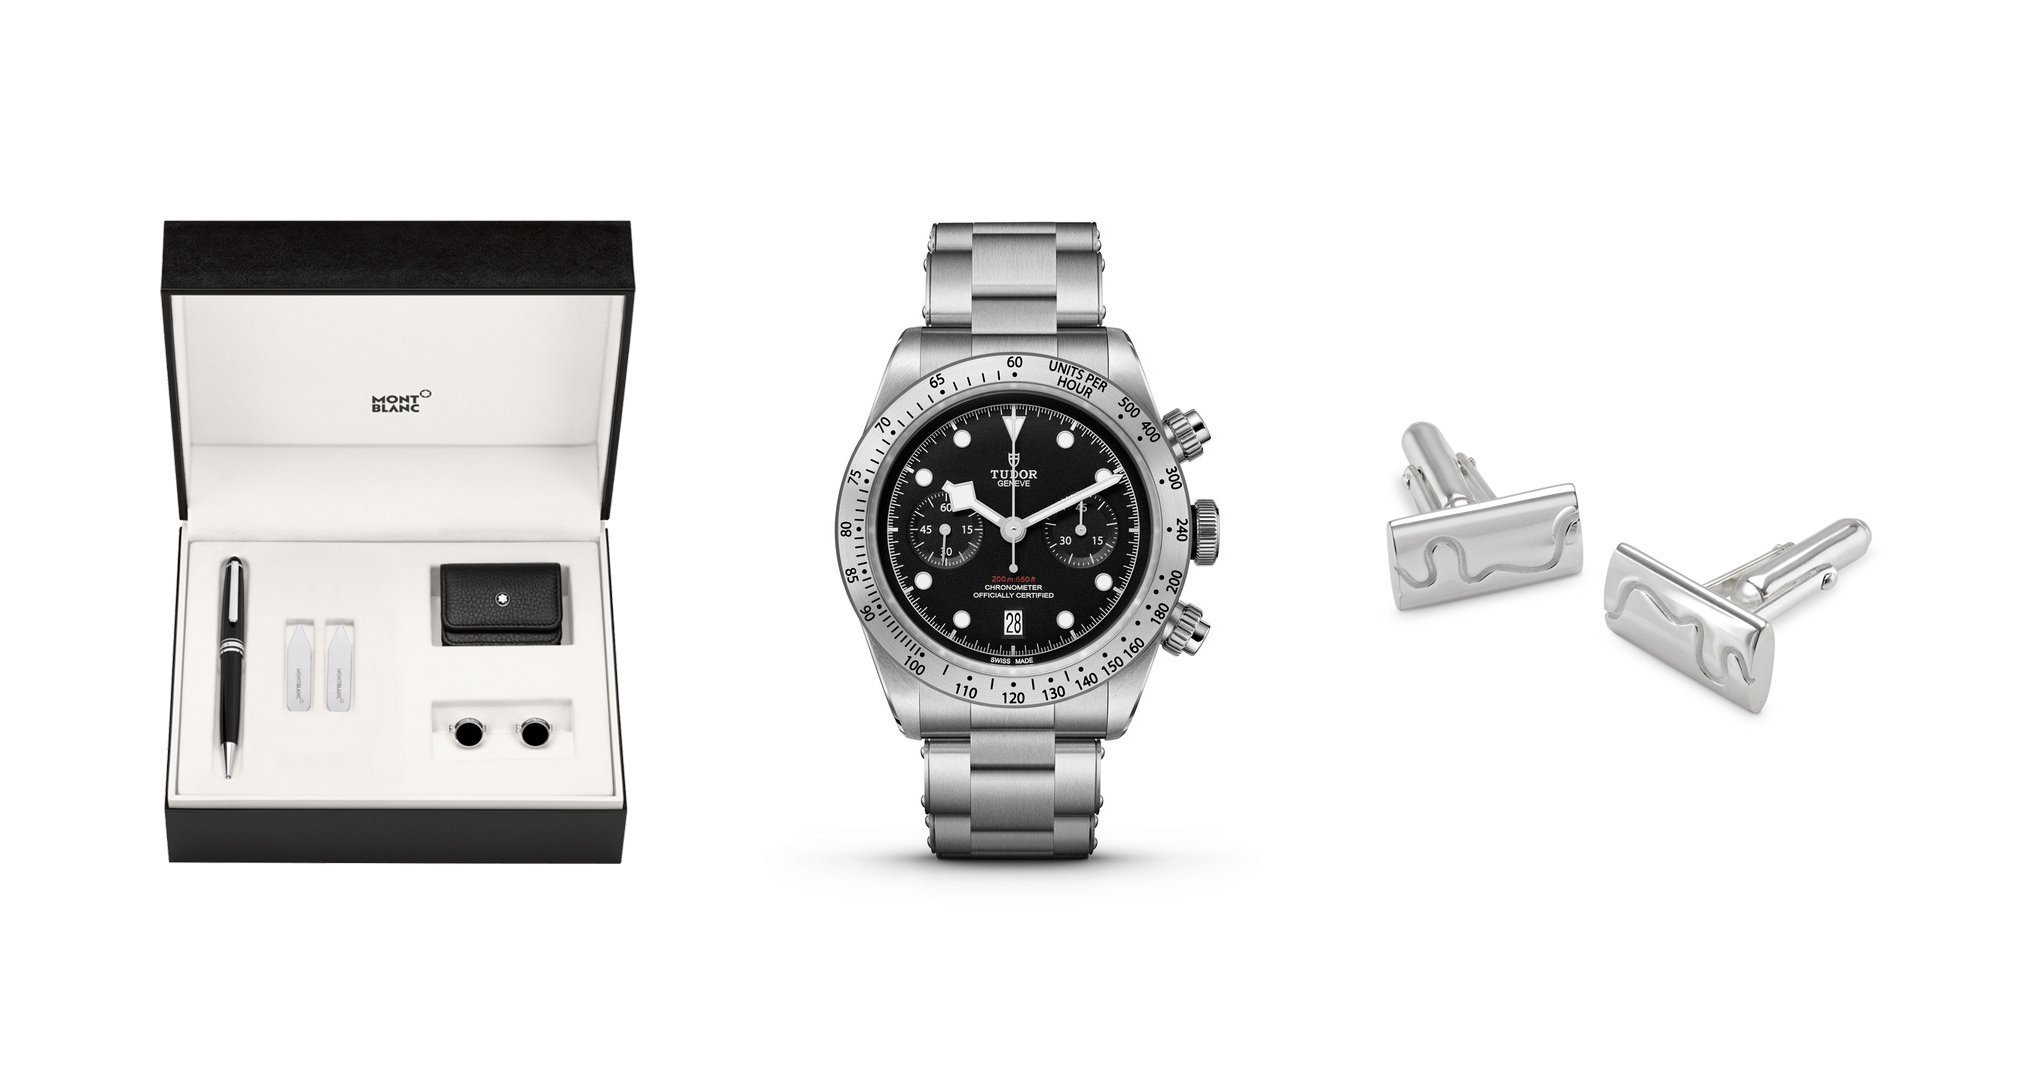 The perfect DMR gifts for Father’s Day!